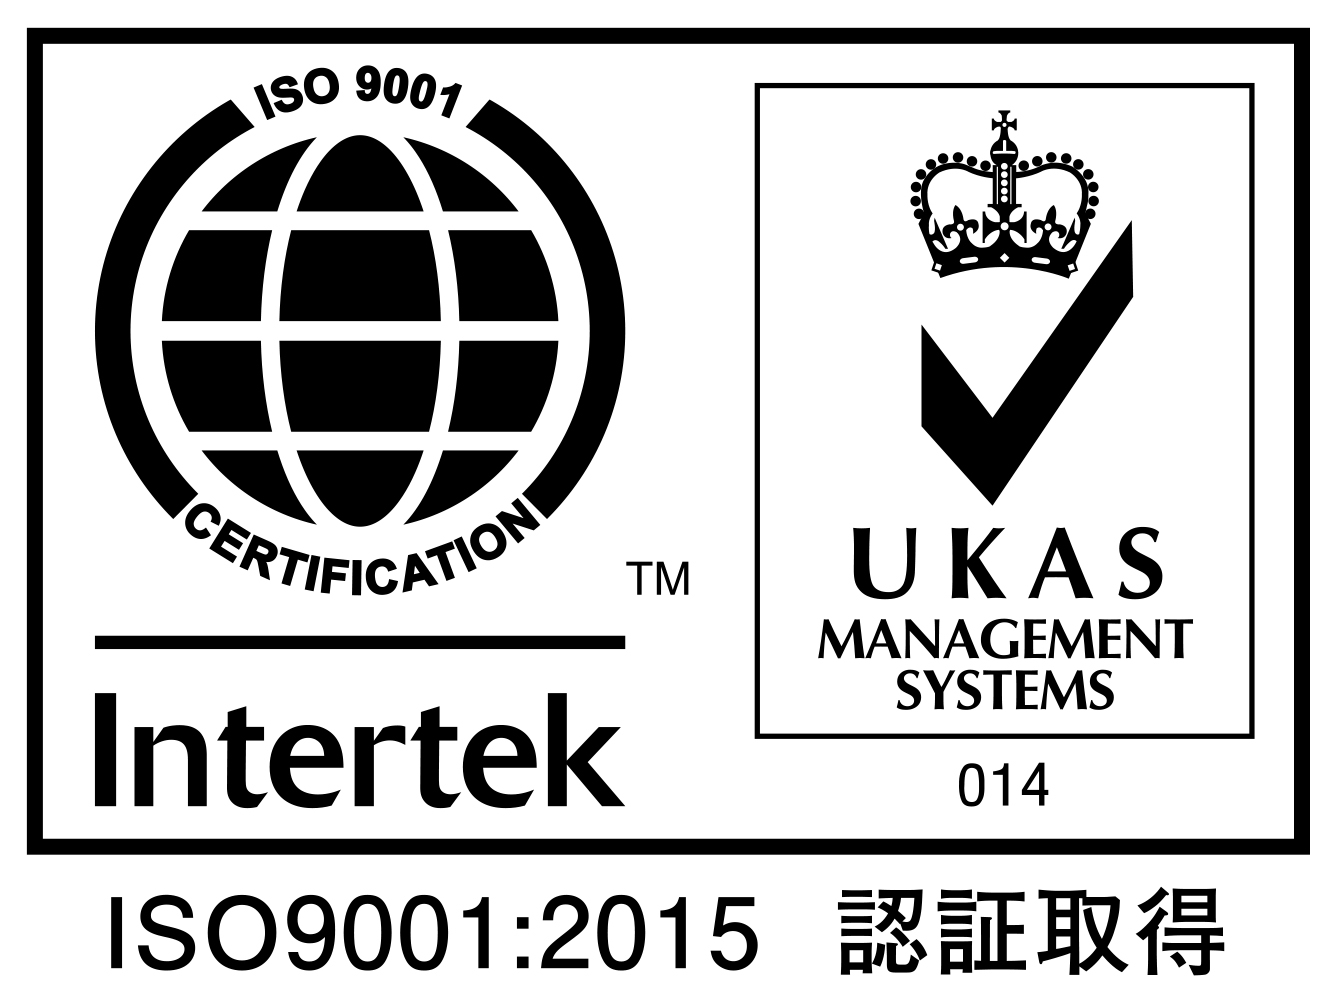 ISO 9001/2015 certification